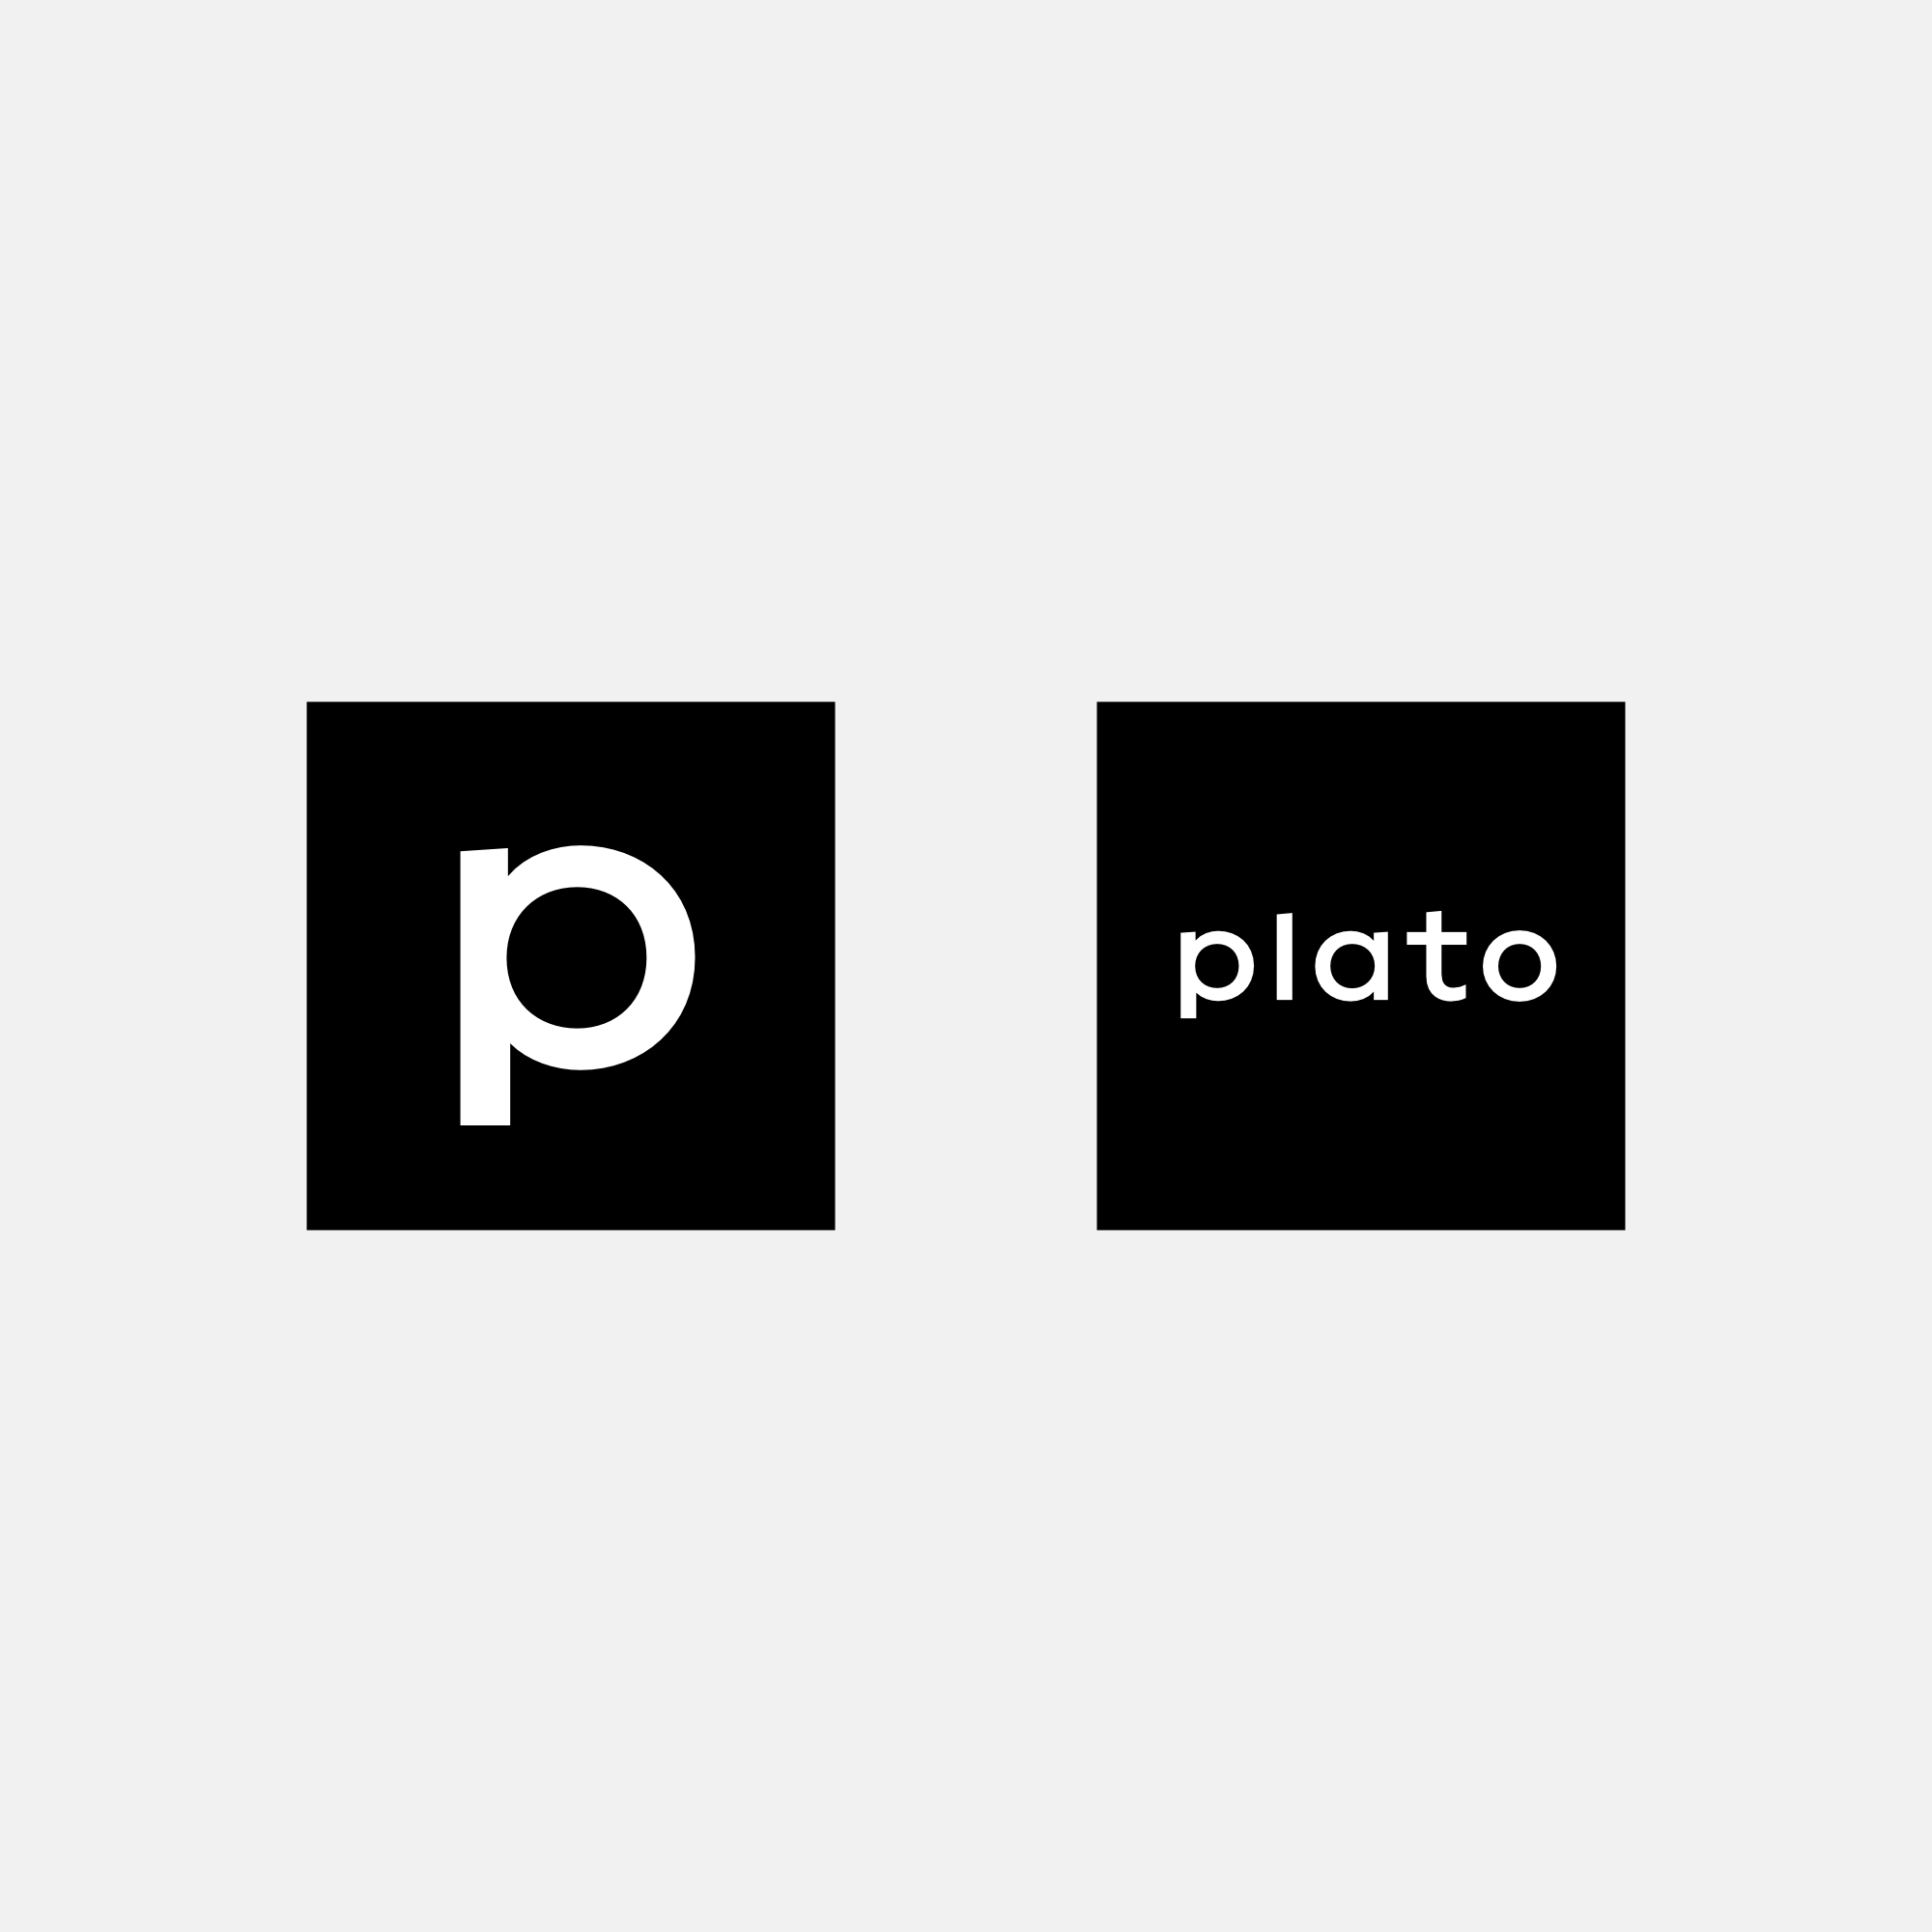 The bespoke brand typeface in use as square icon